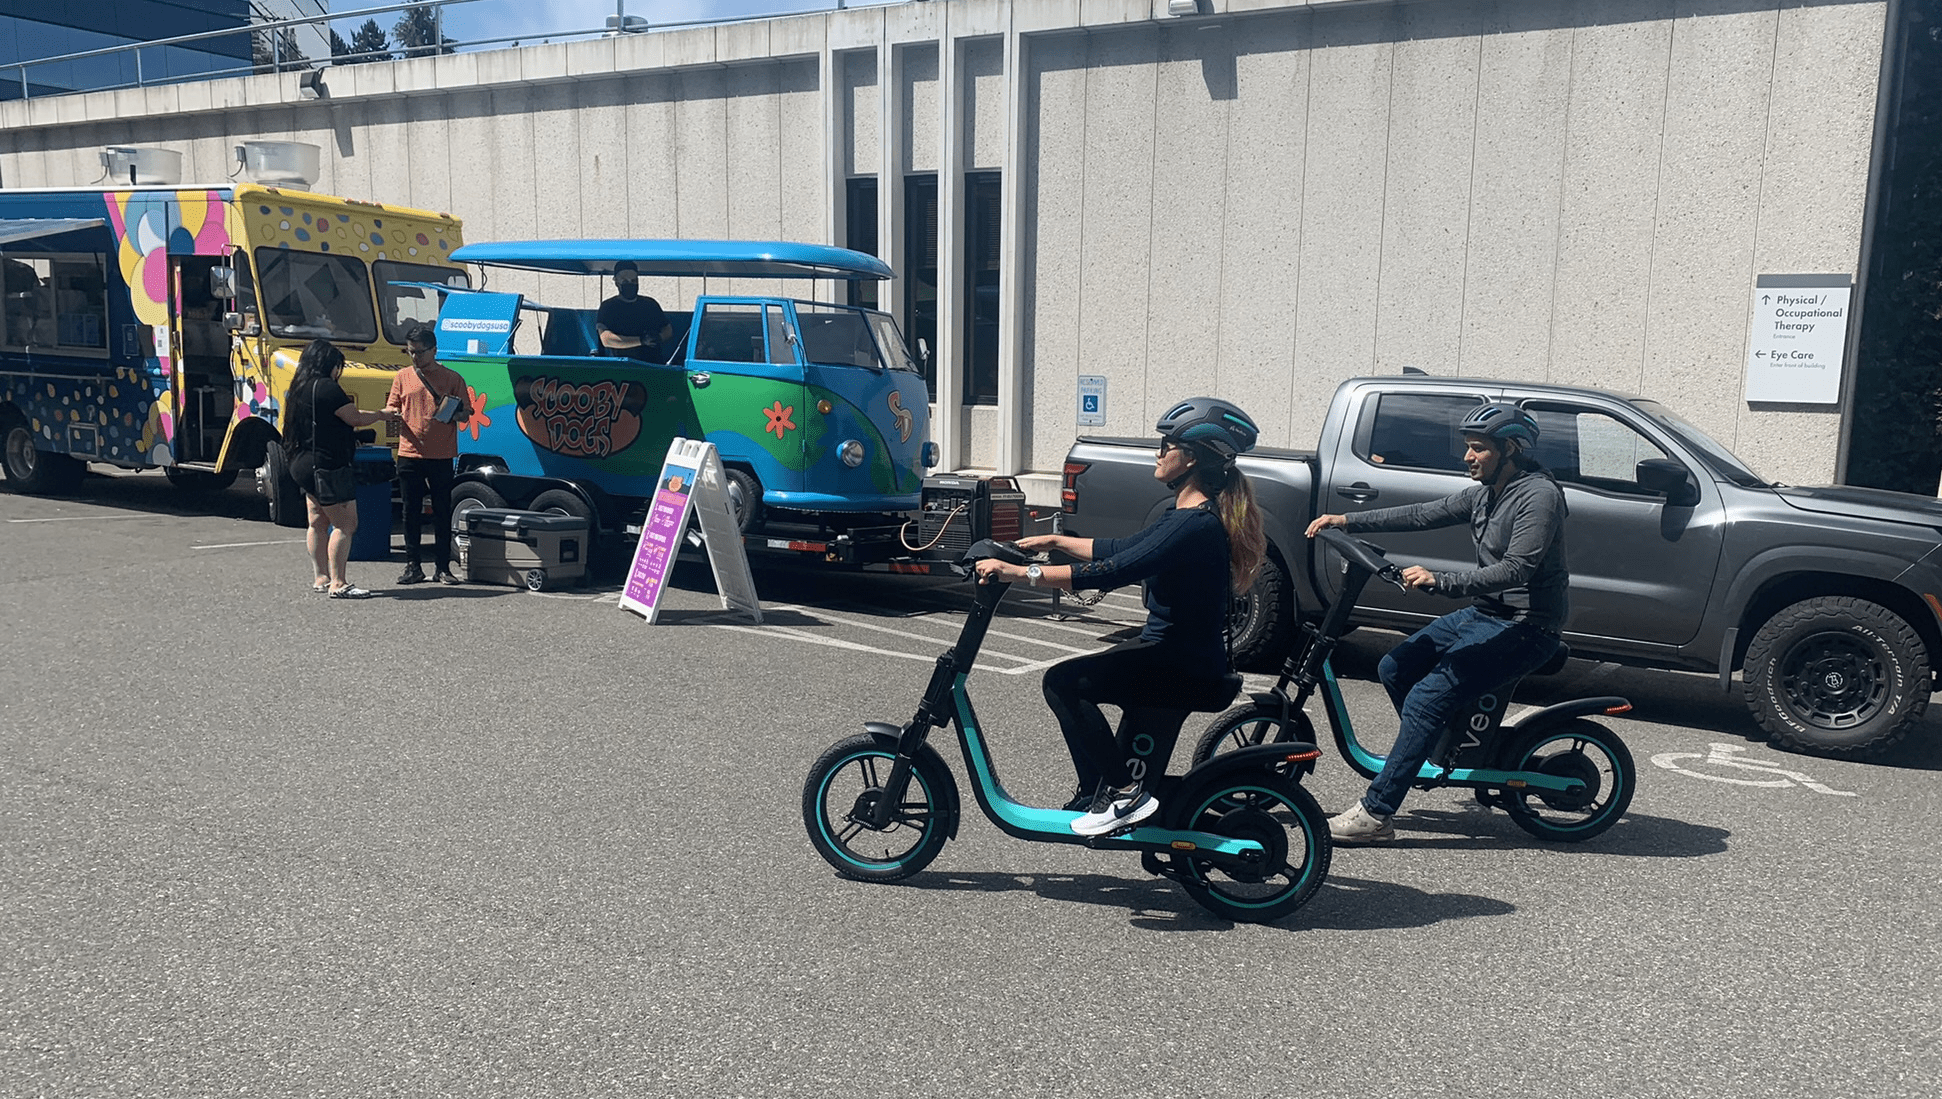 A man and a woman ride bike share equipment at a public demonstration and training event in summer 2022. They are biking in a parking lot, wearing helmets, in front of several parked vehicles.